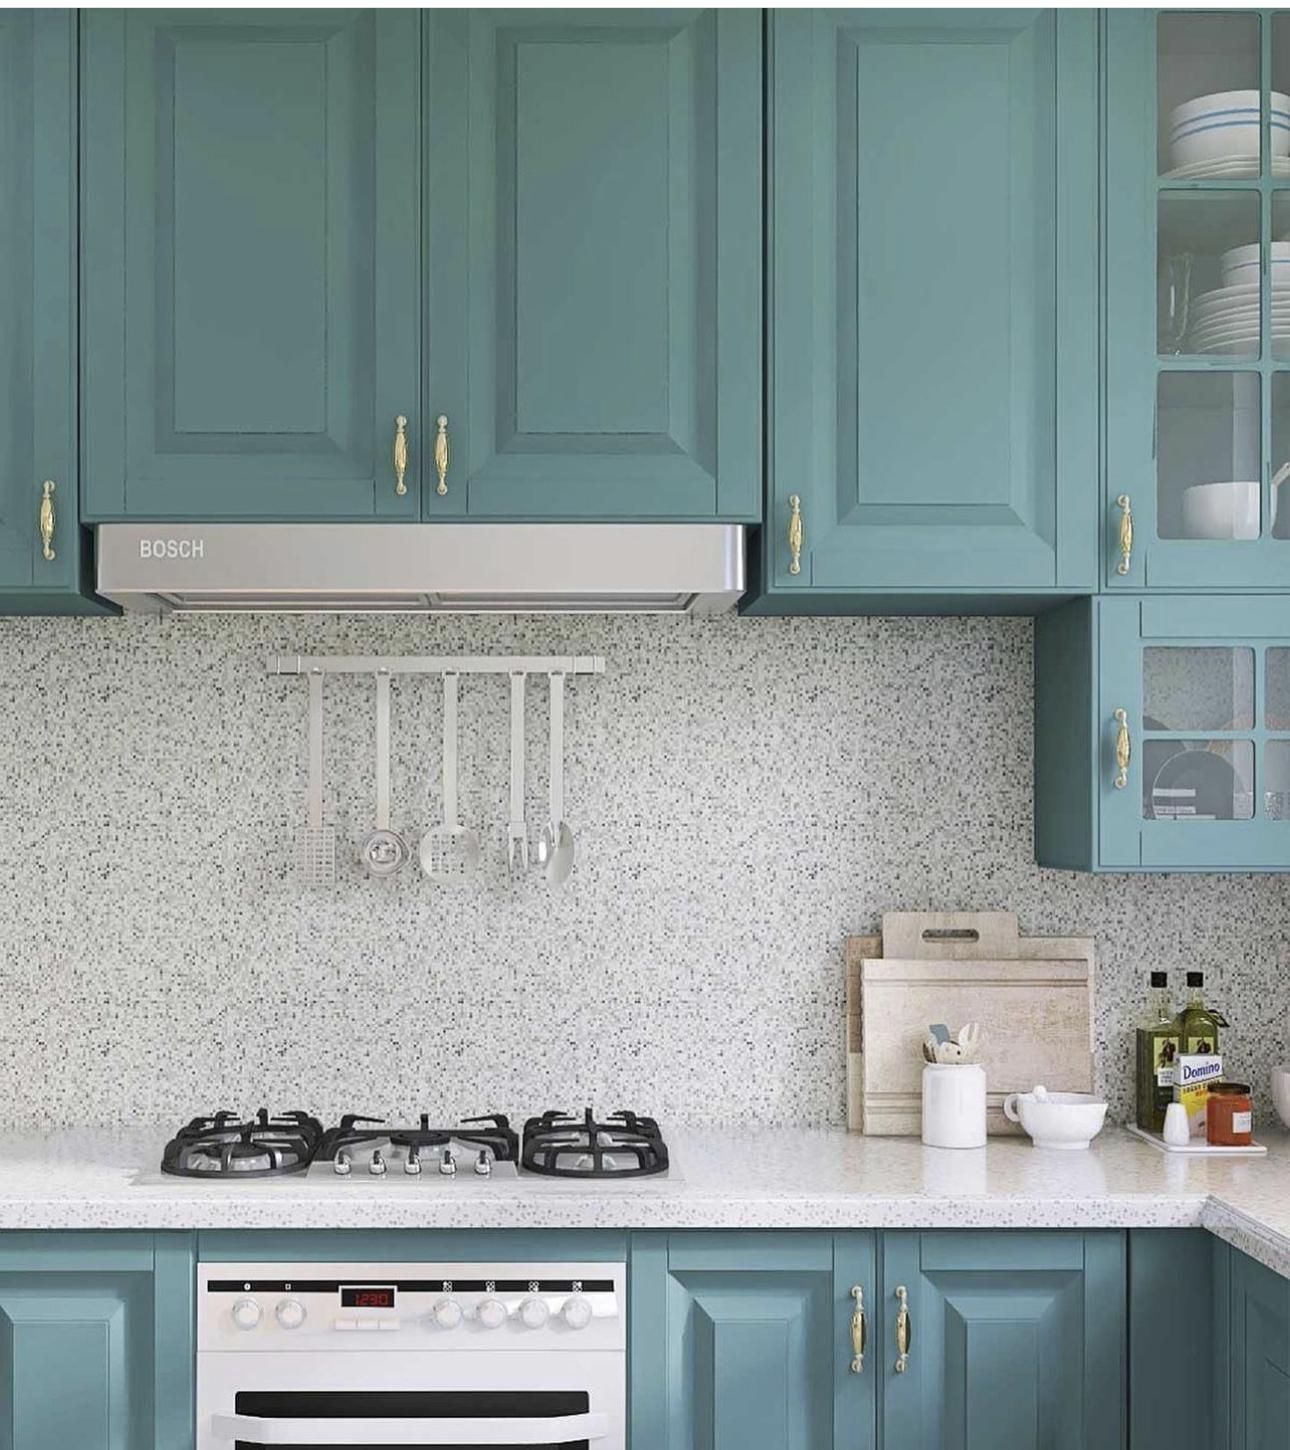 (Upgrade your kitchen with Benjamin Moore Aegean Teal)